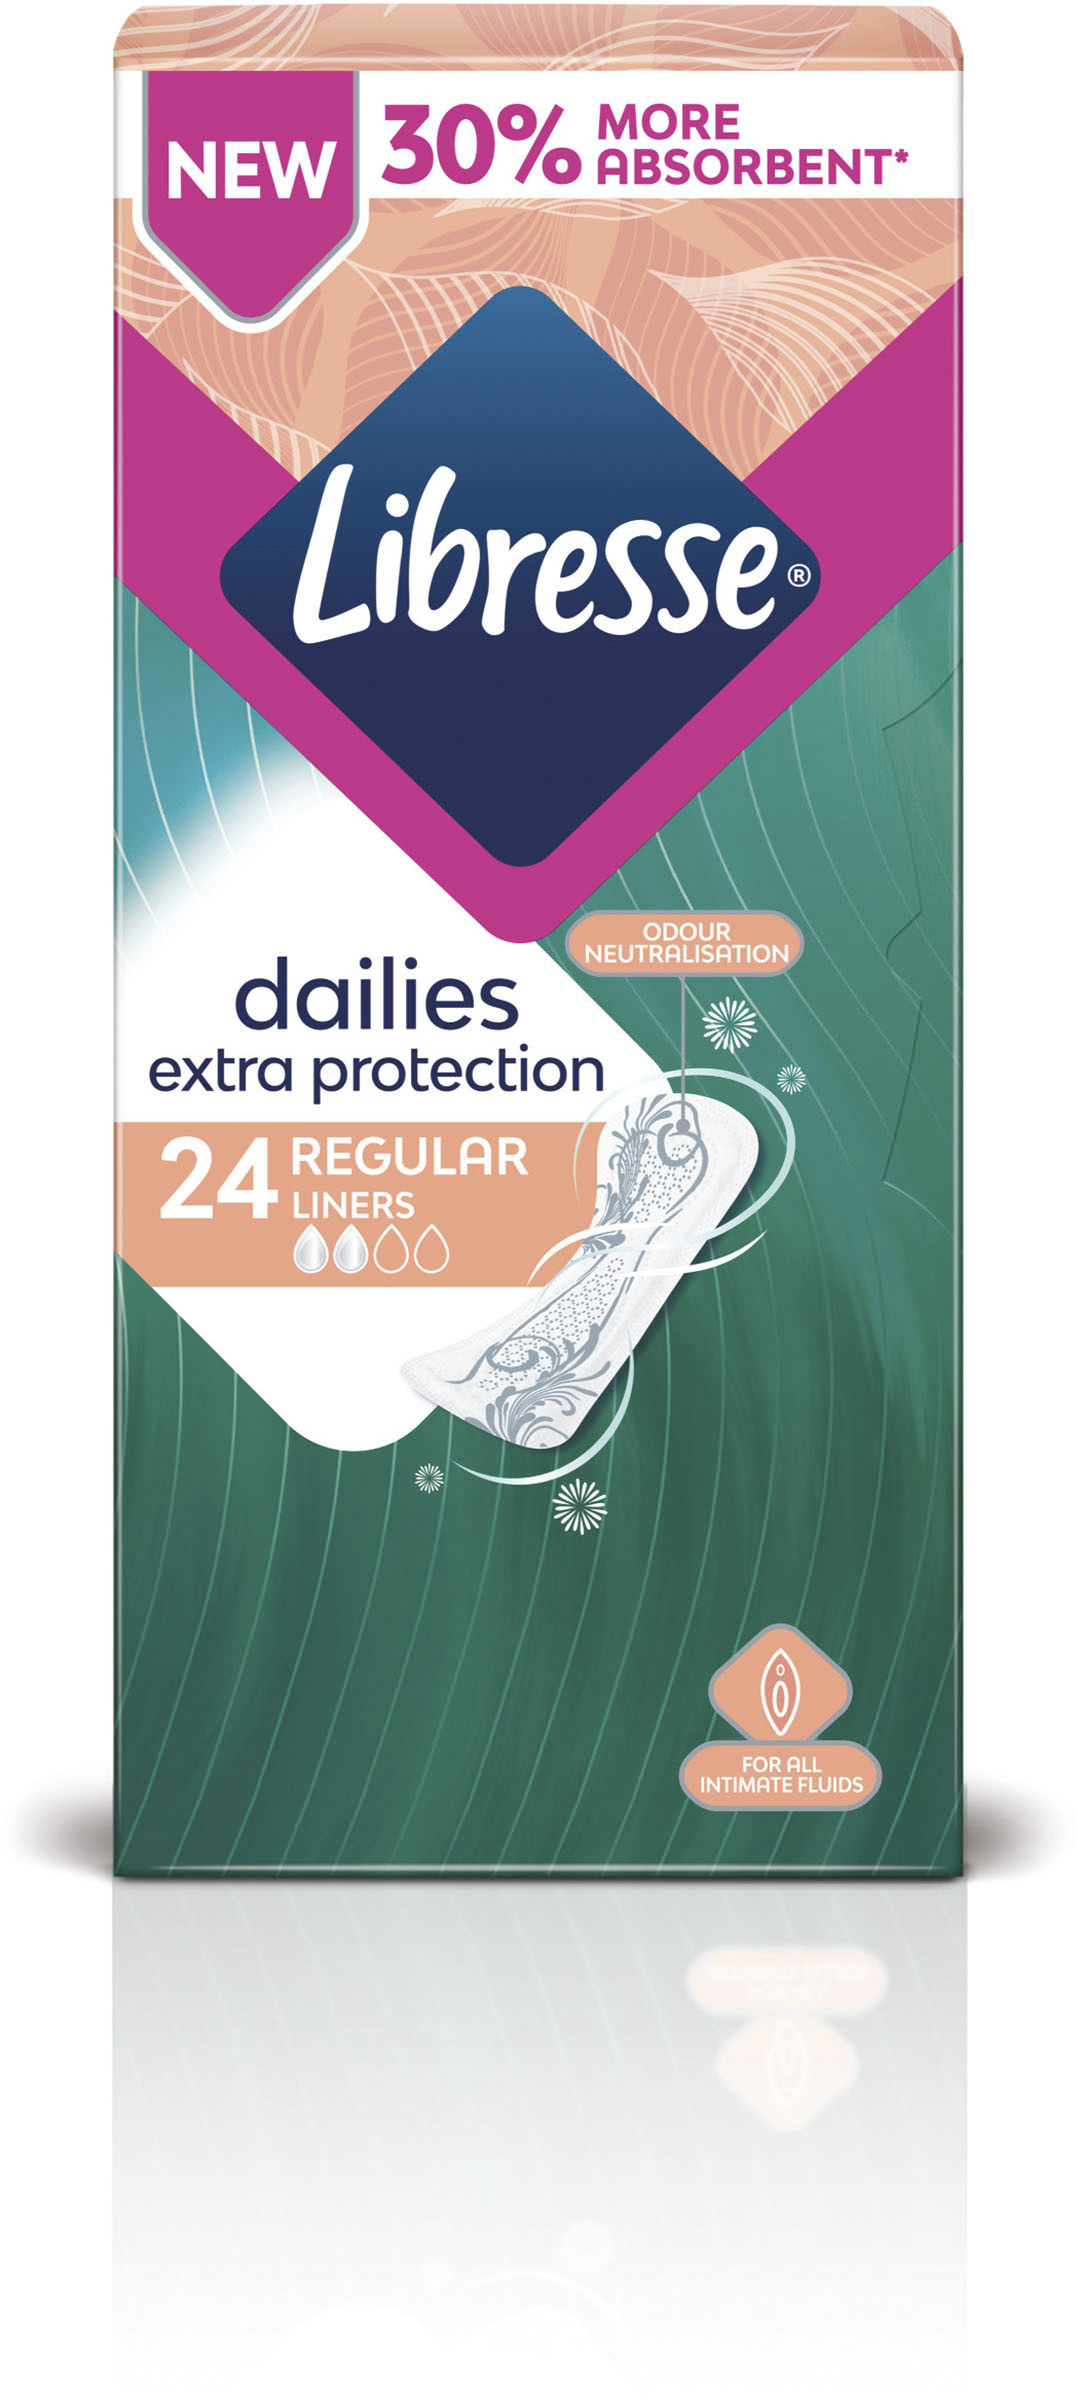 Libresse Dailies Extra Protection Regular Trosskydd 24 st